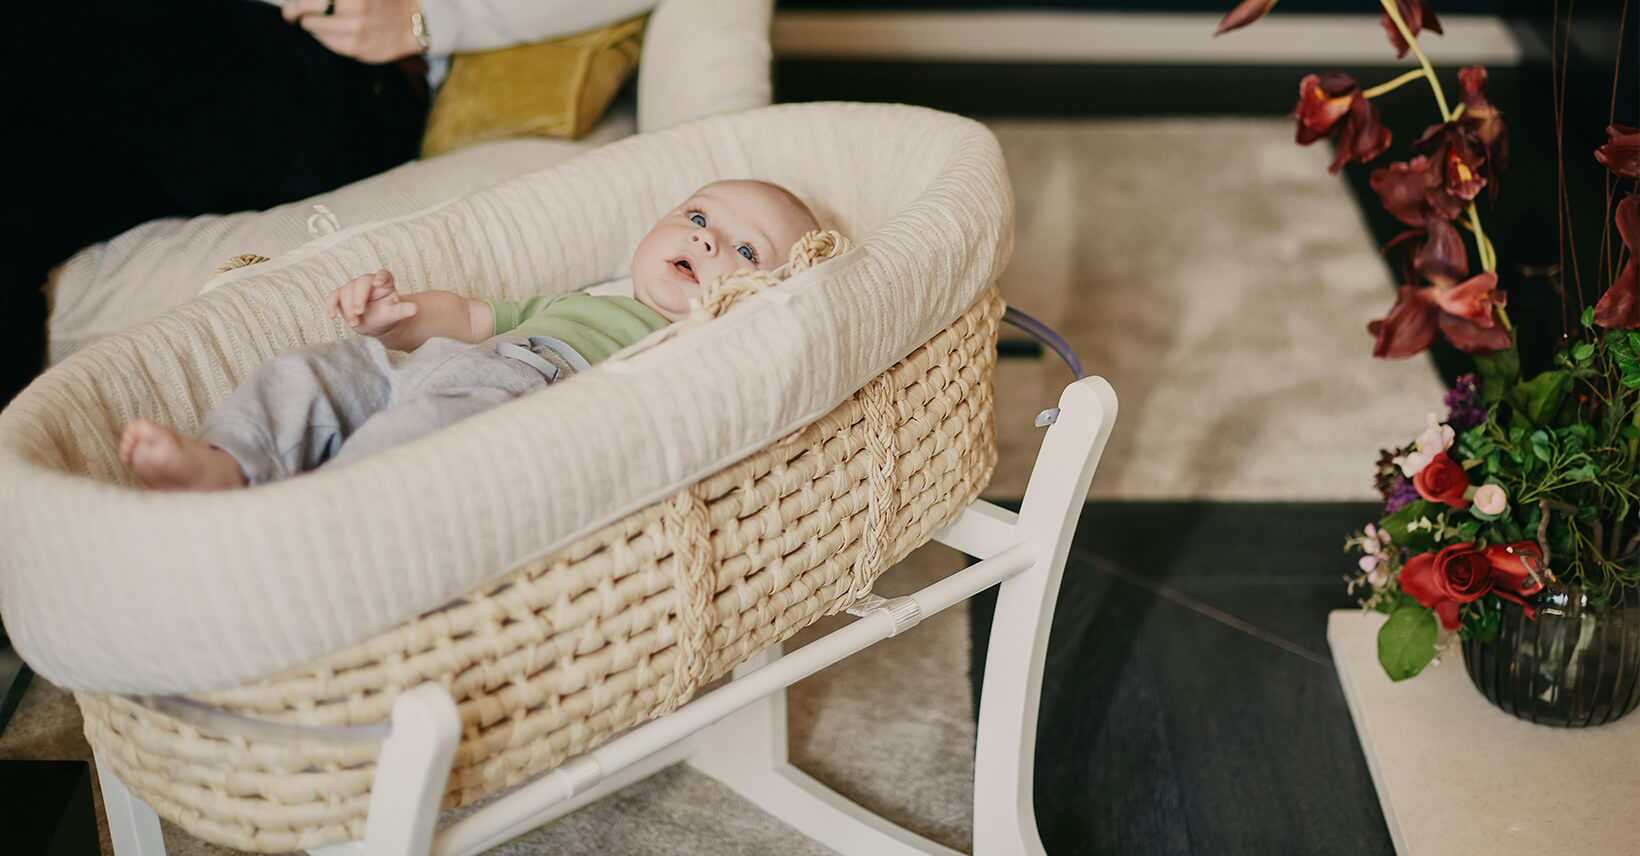 What to Do When Your Baby Won’t Sleep in the Bassinet?